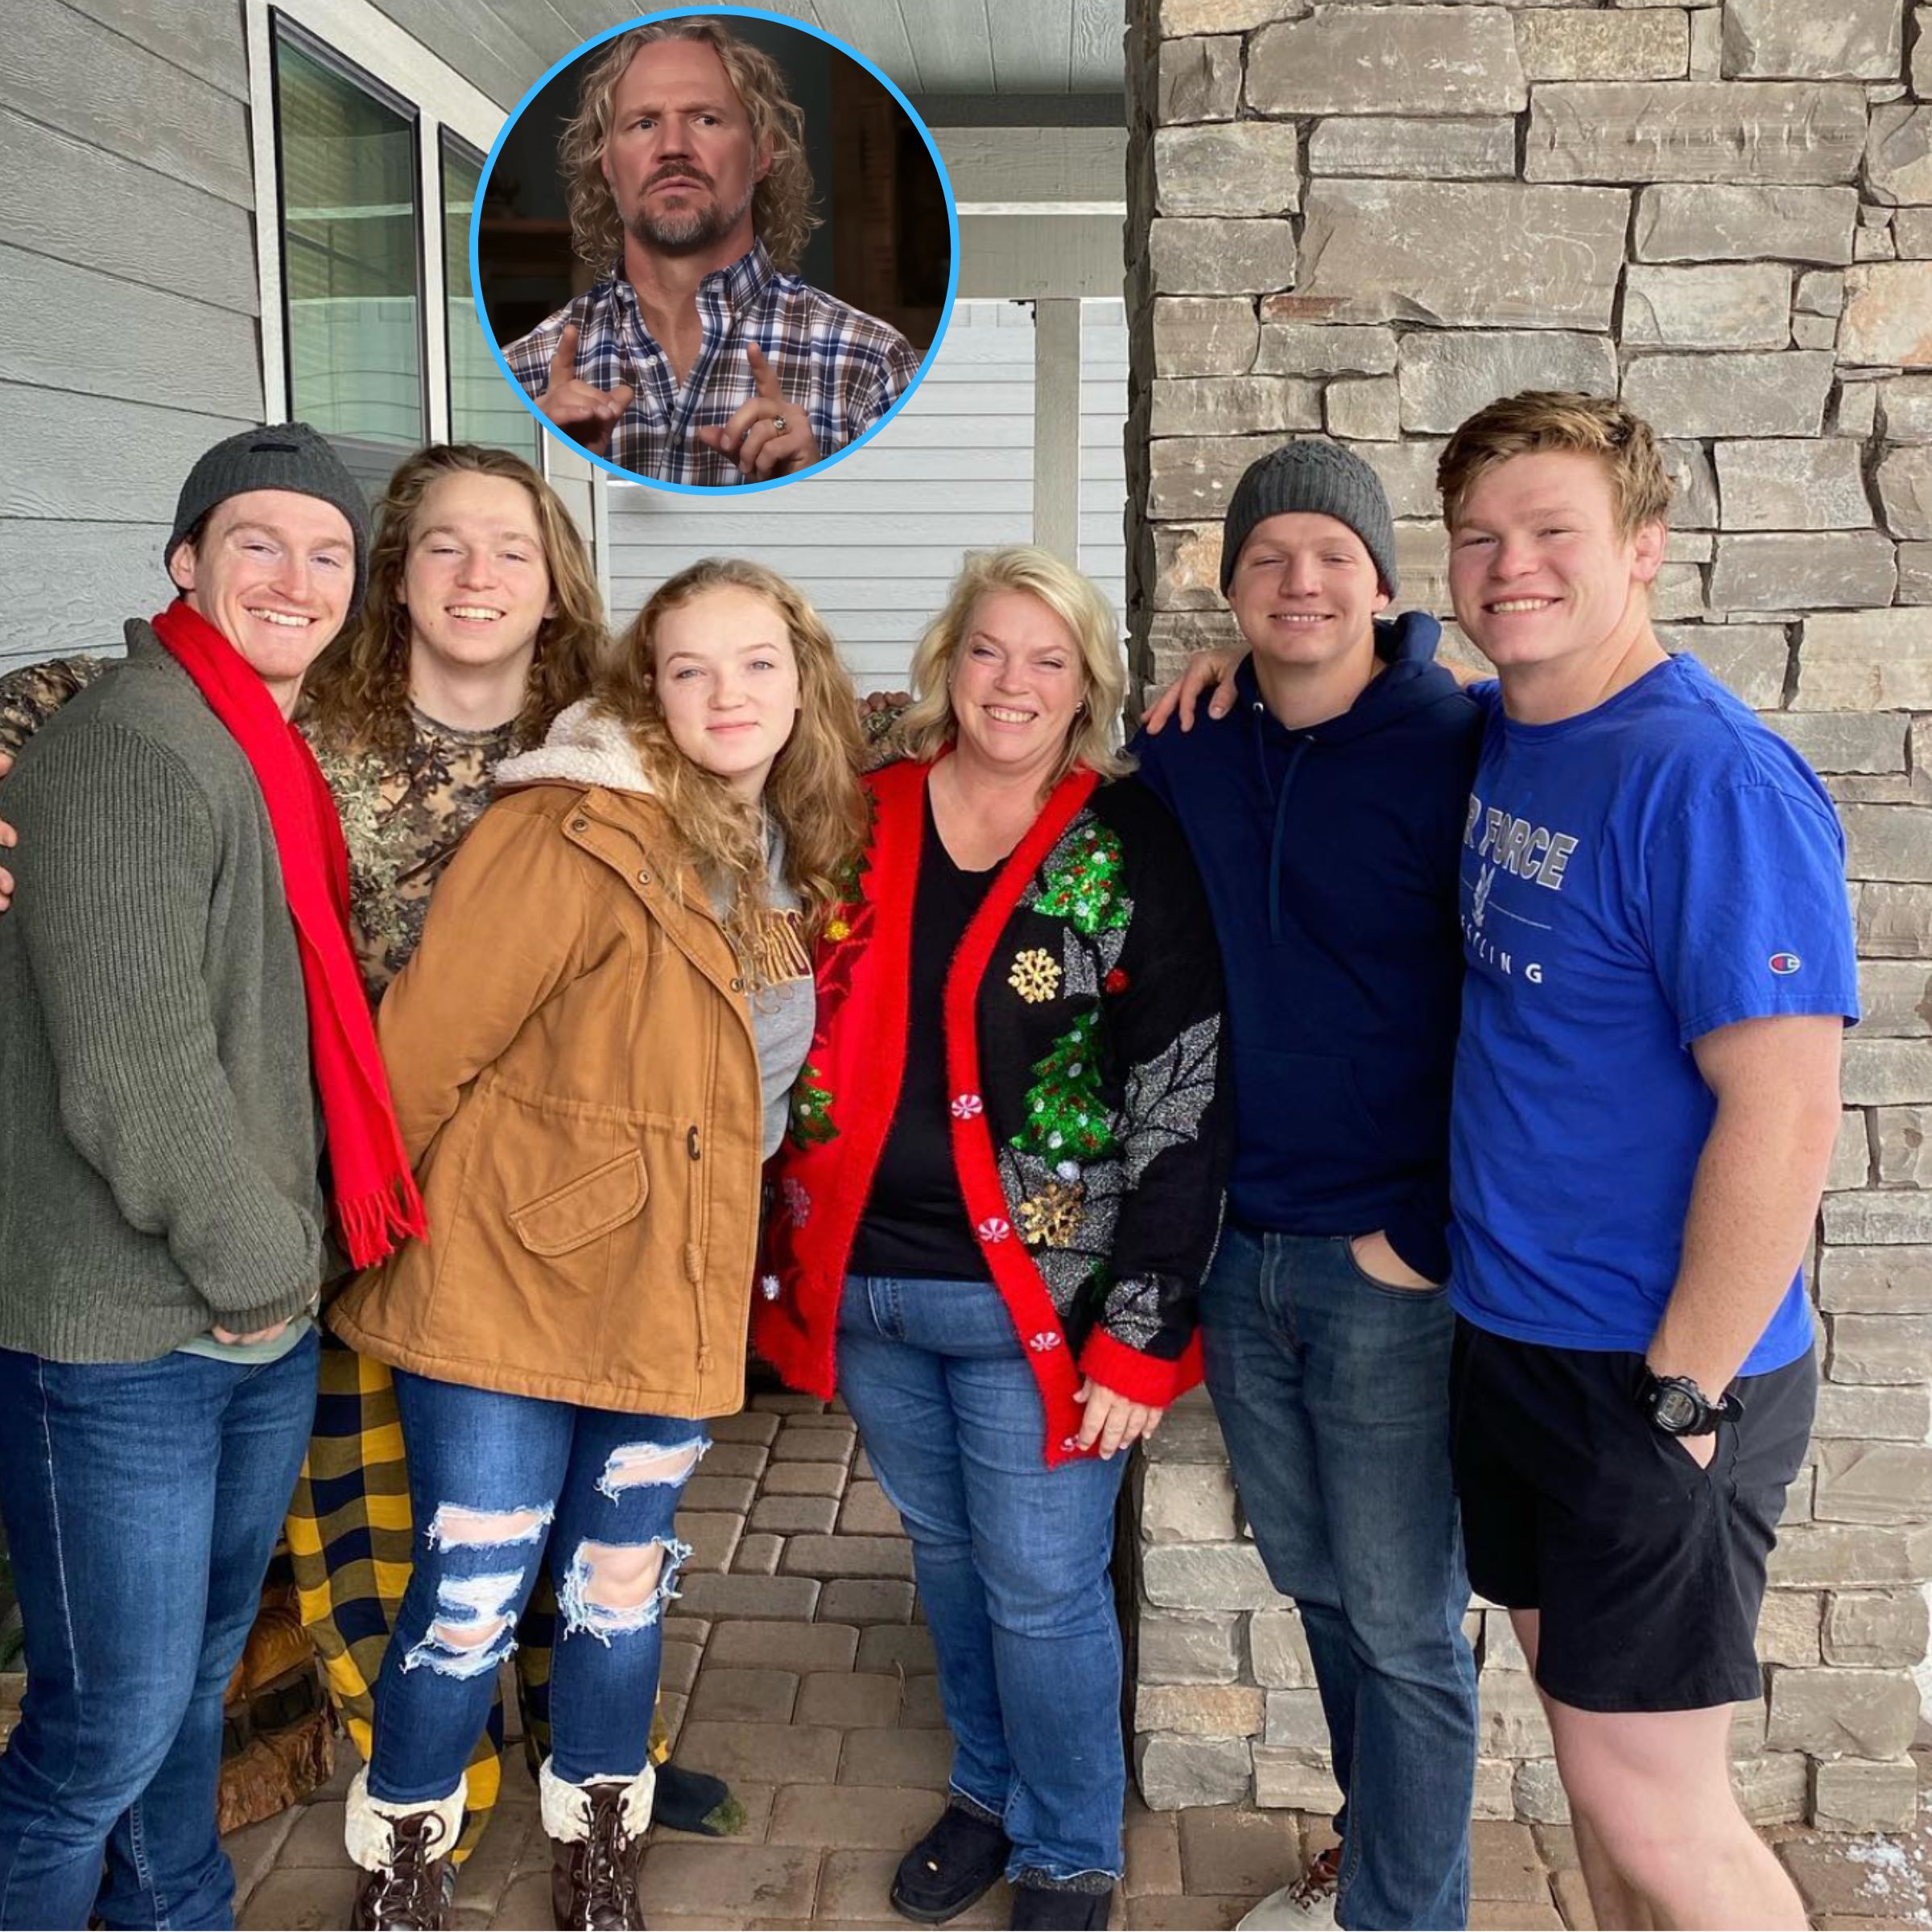 Sister Wives' Janelle Brown Children: Kids With Kody